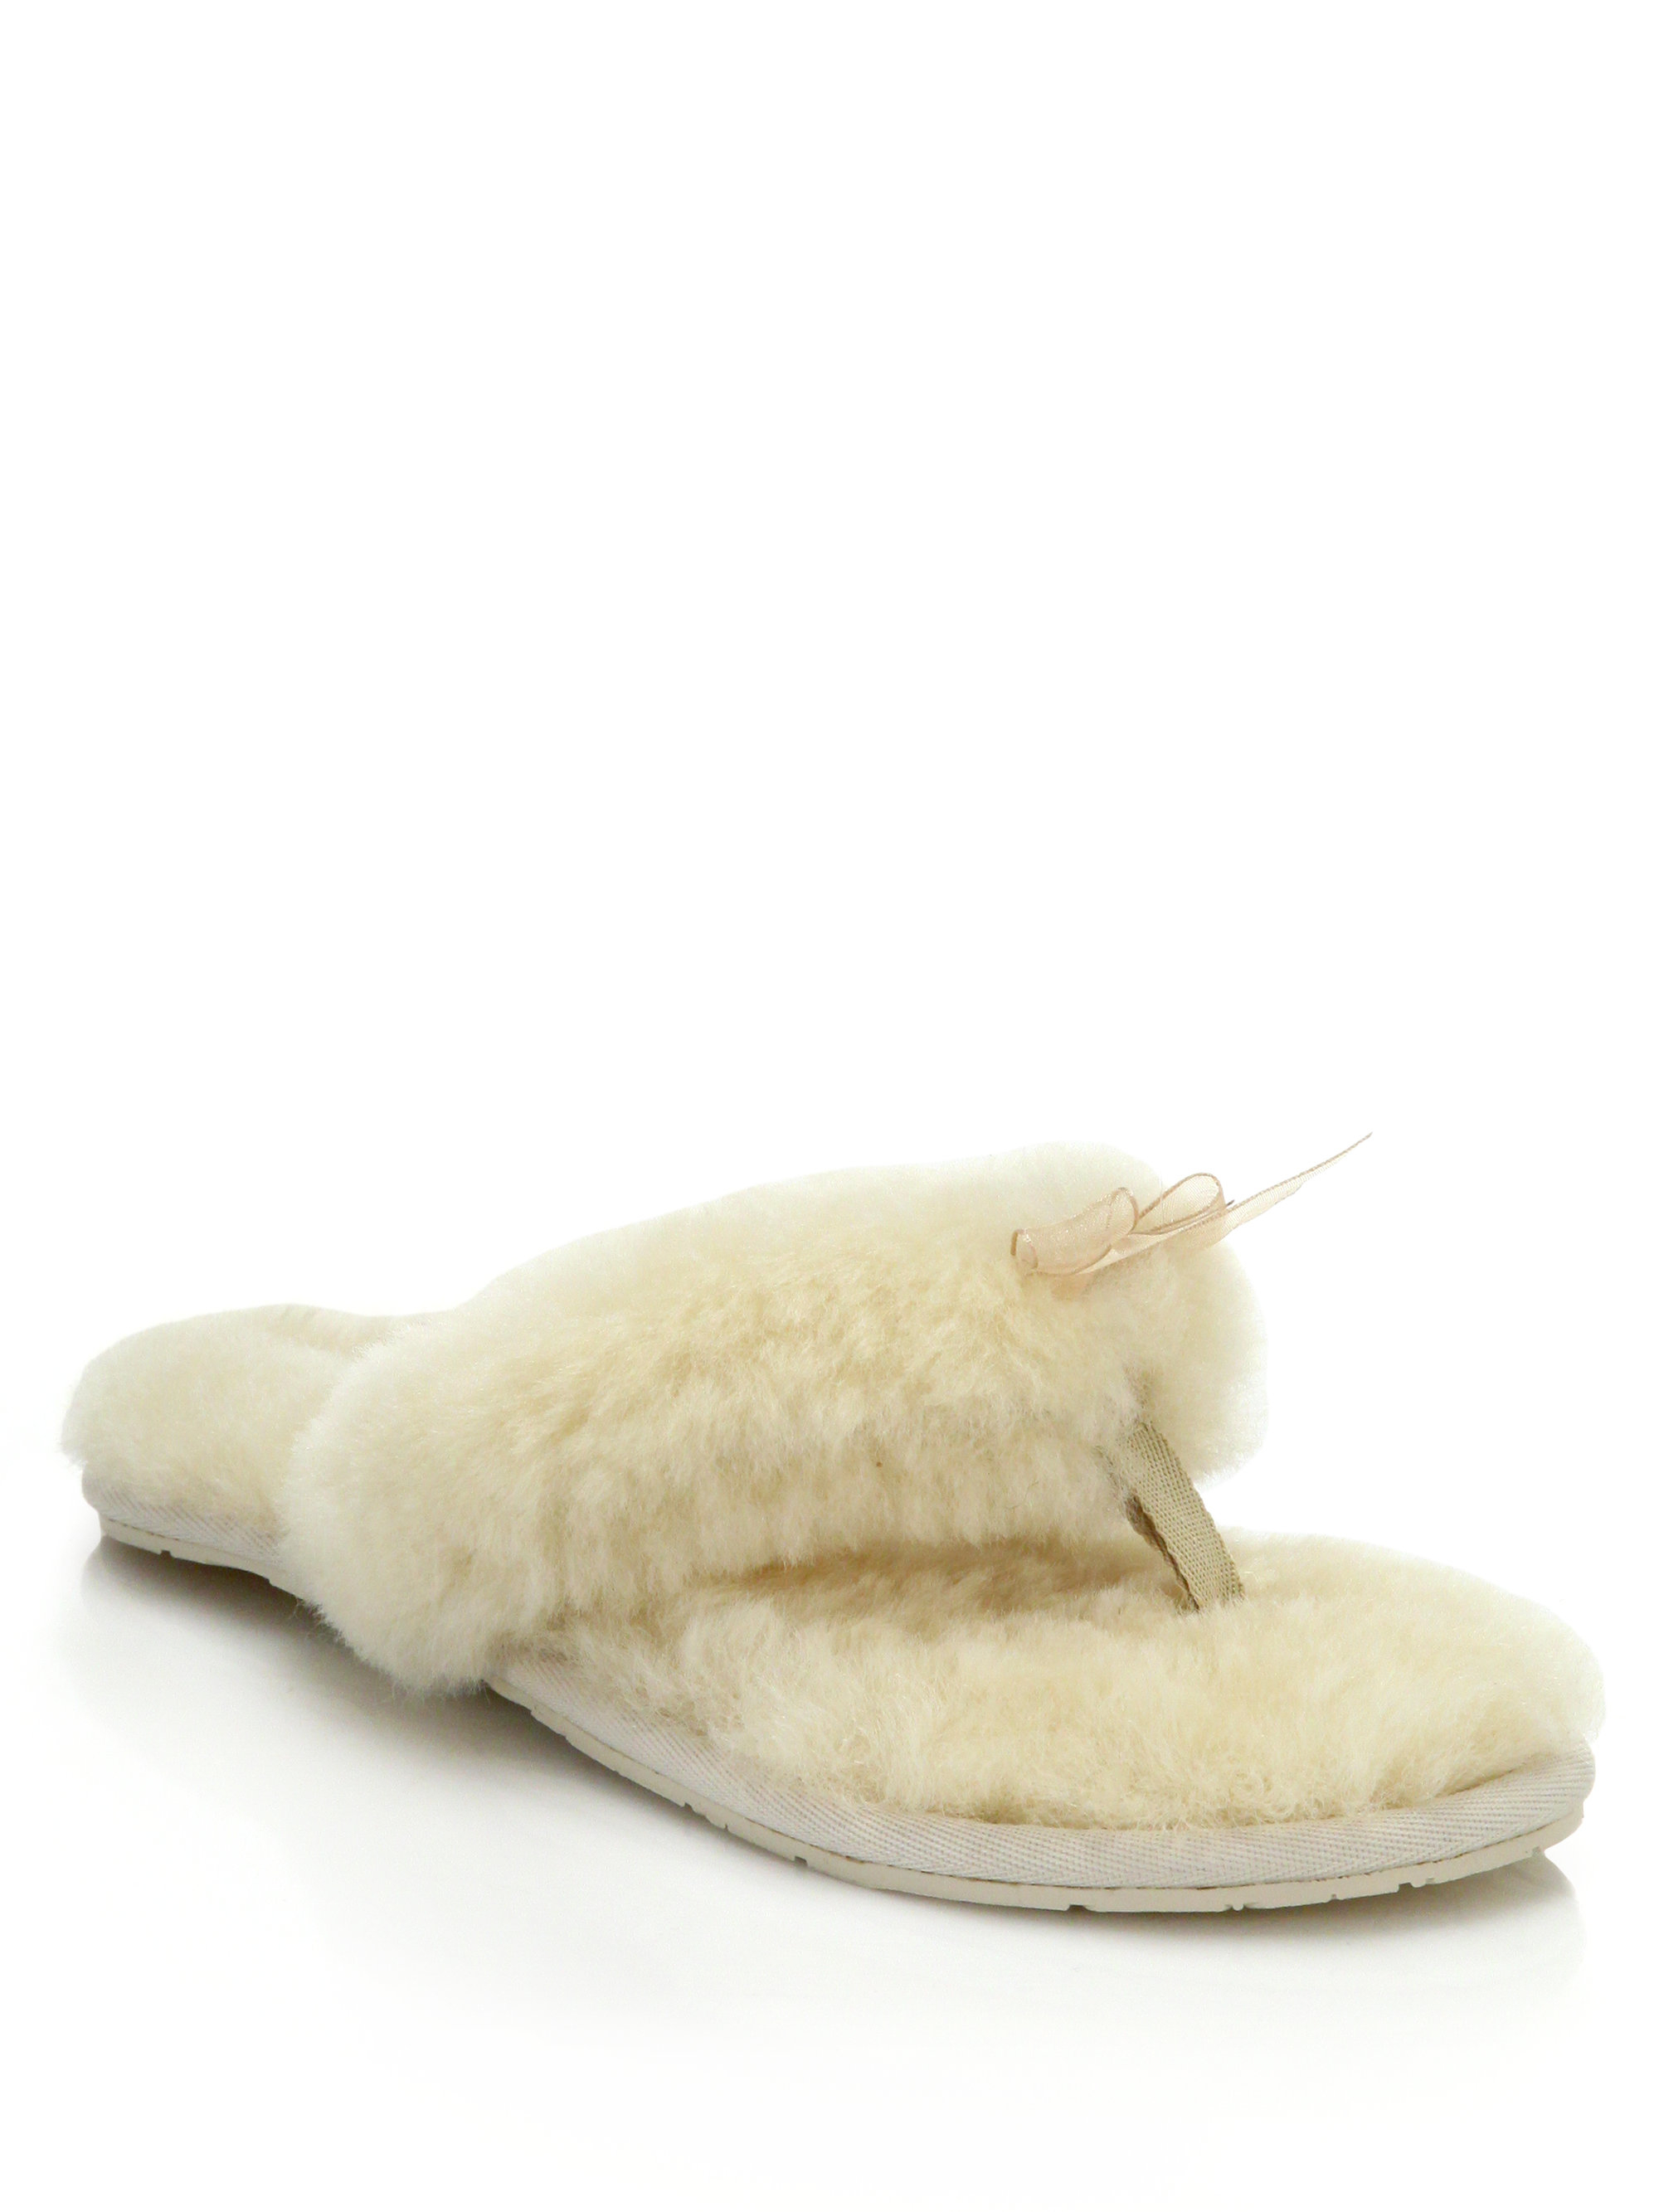 ugg thong slippers sale